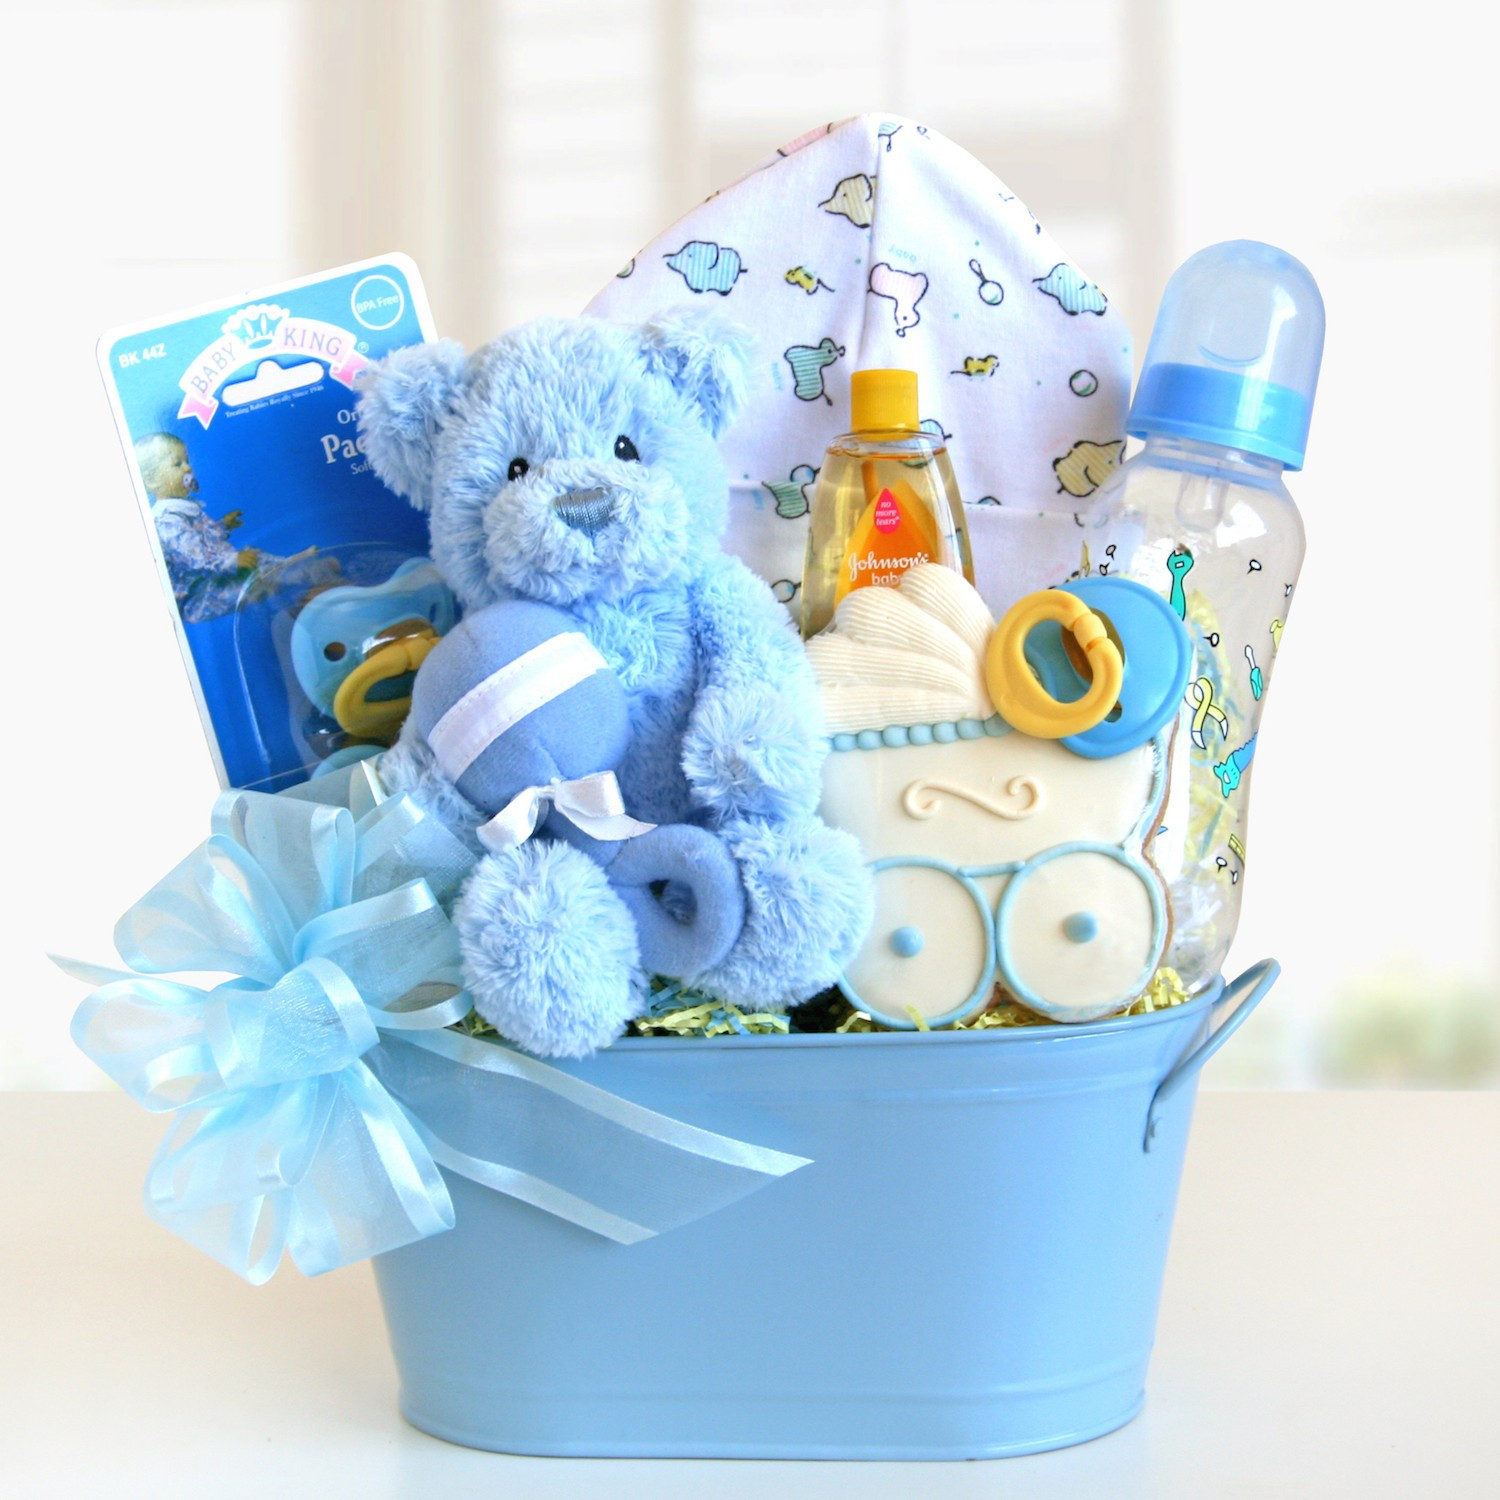 Gift Ideas For Baby Boys
 Sweet and Cuddly Baby Boy Gift Basket Gift Baskets Plus